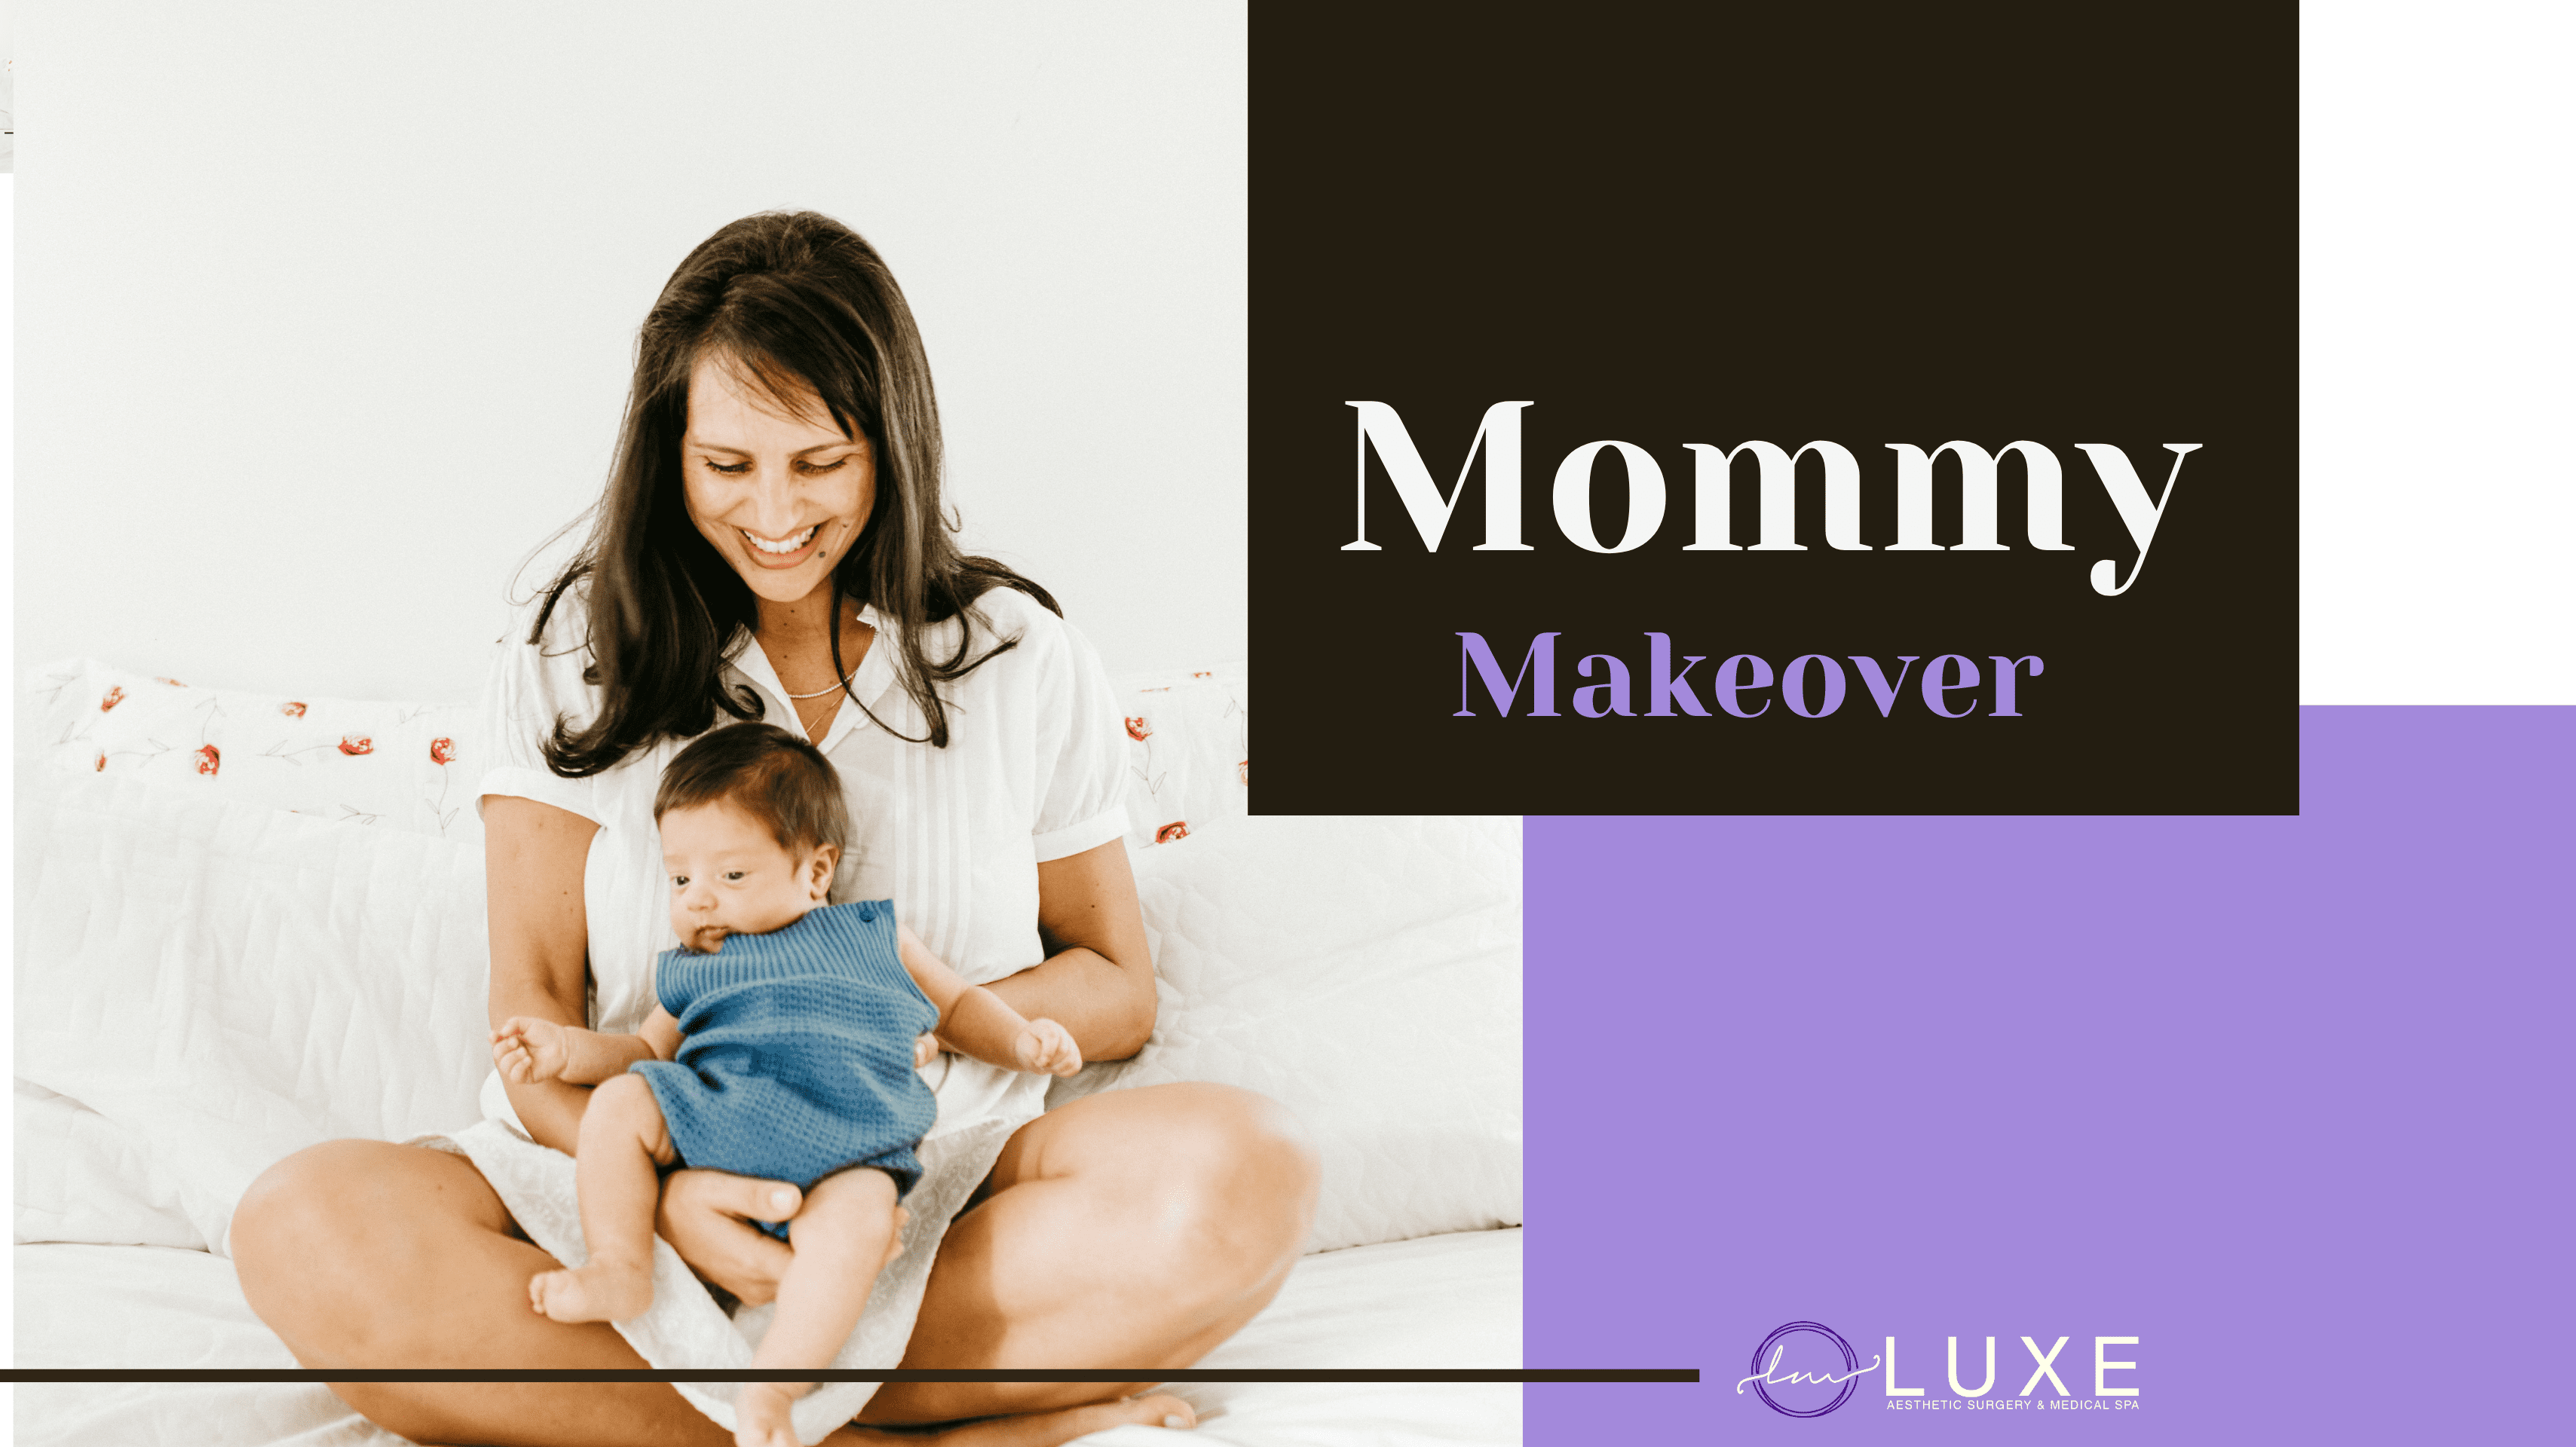 Best Mommy Makeover Clinic Los Angeles